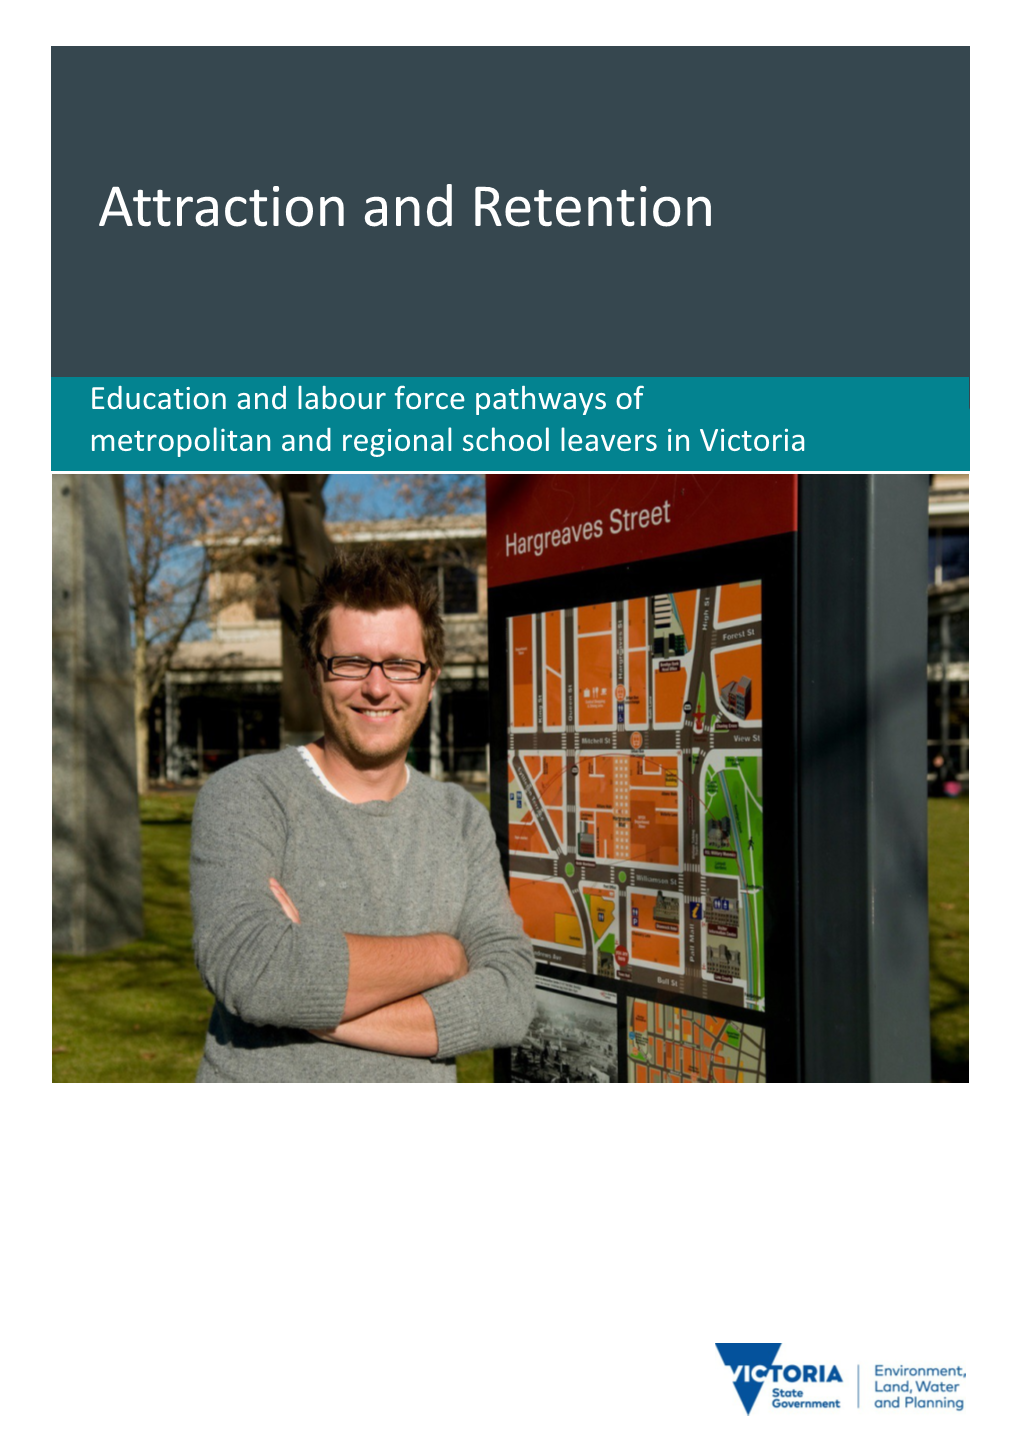 Attraction and Retention